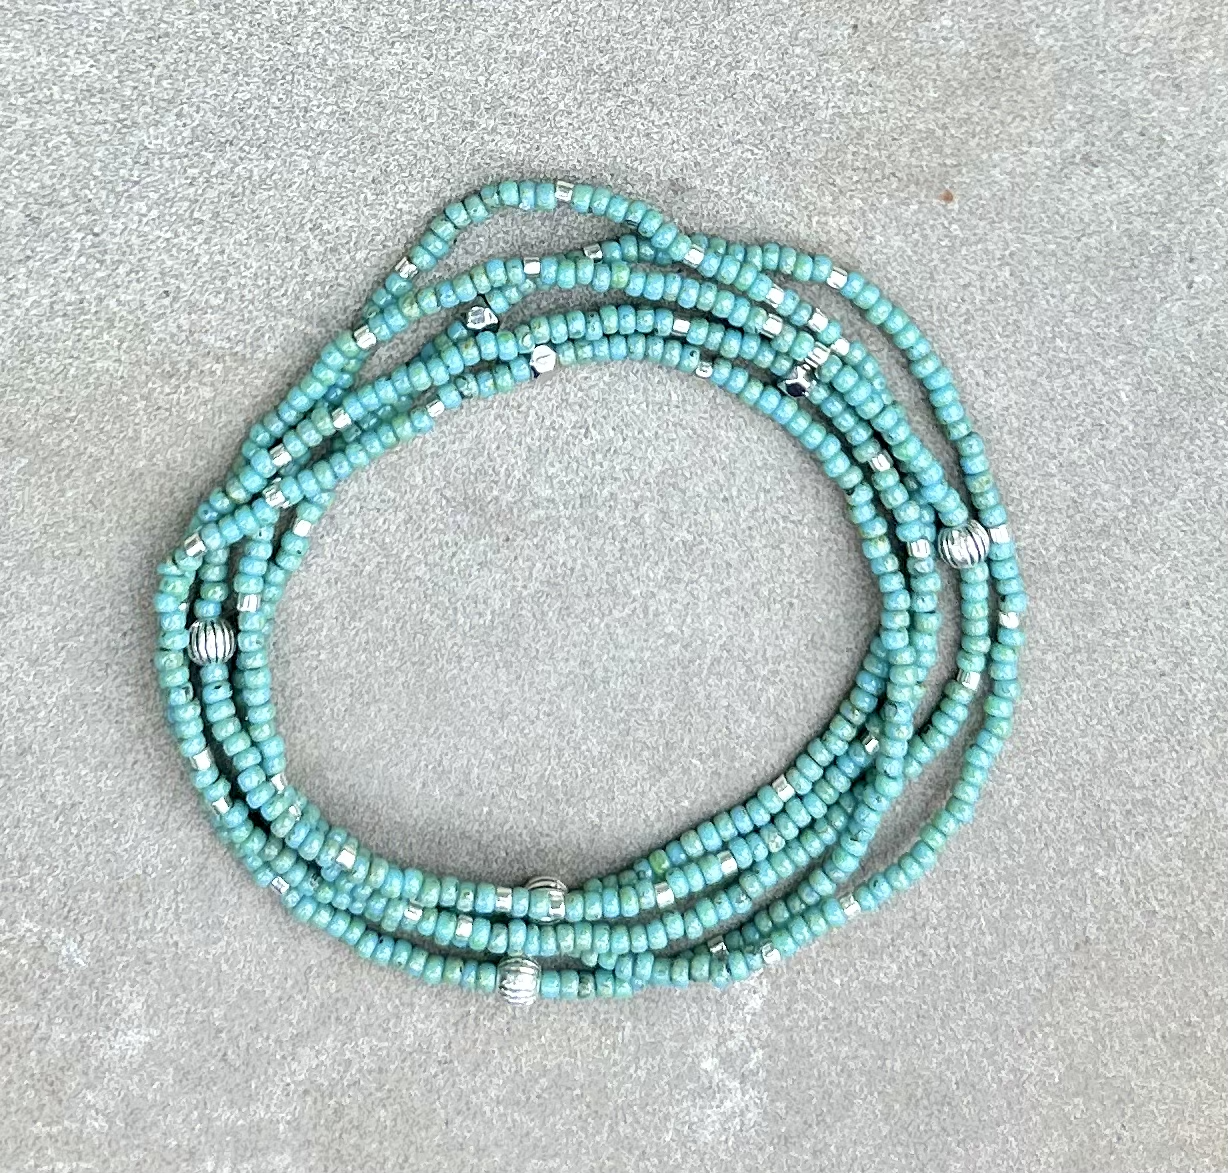 Double-Up 2-Piece Turquoise & Silver Beaded Wrap Bracelet